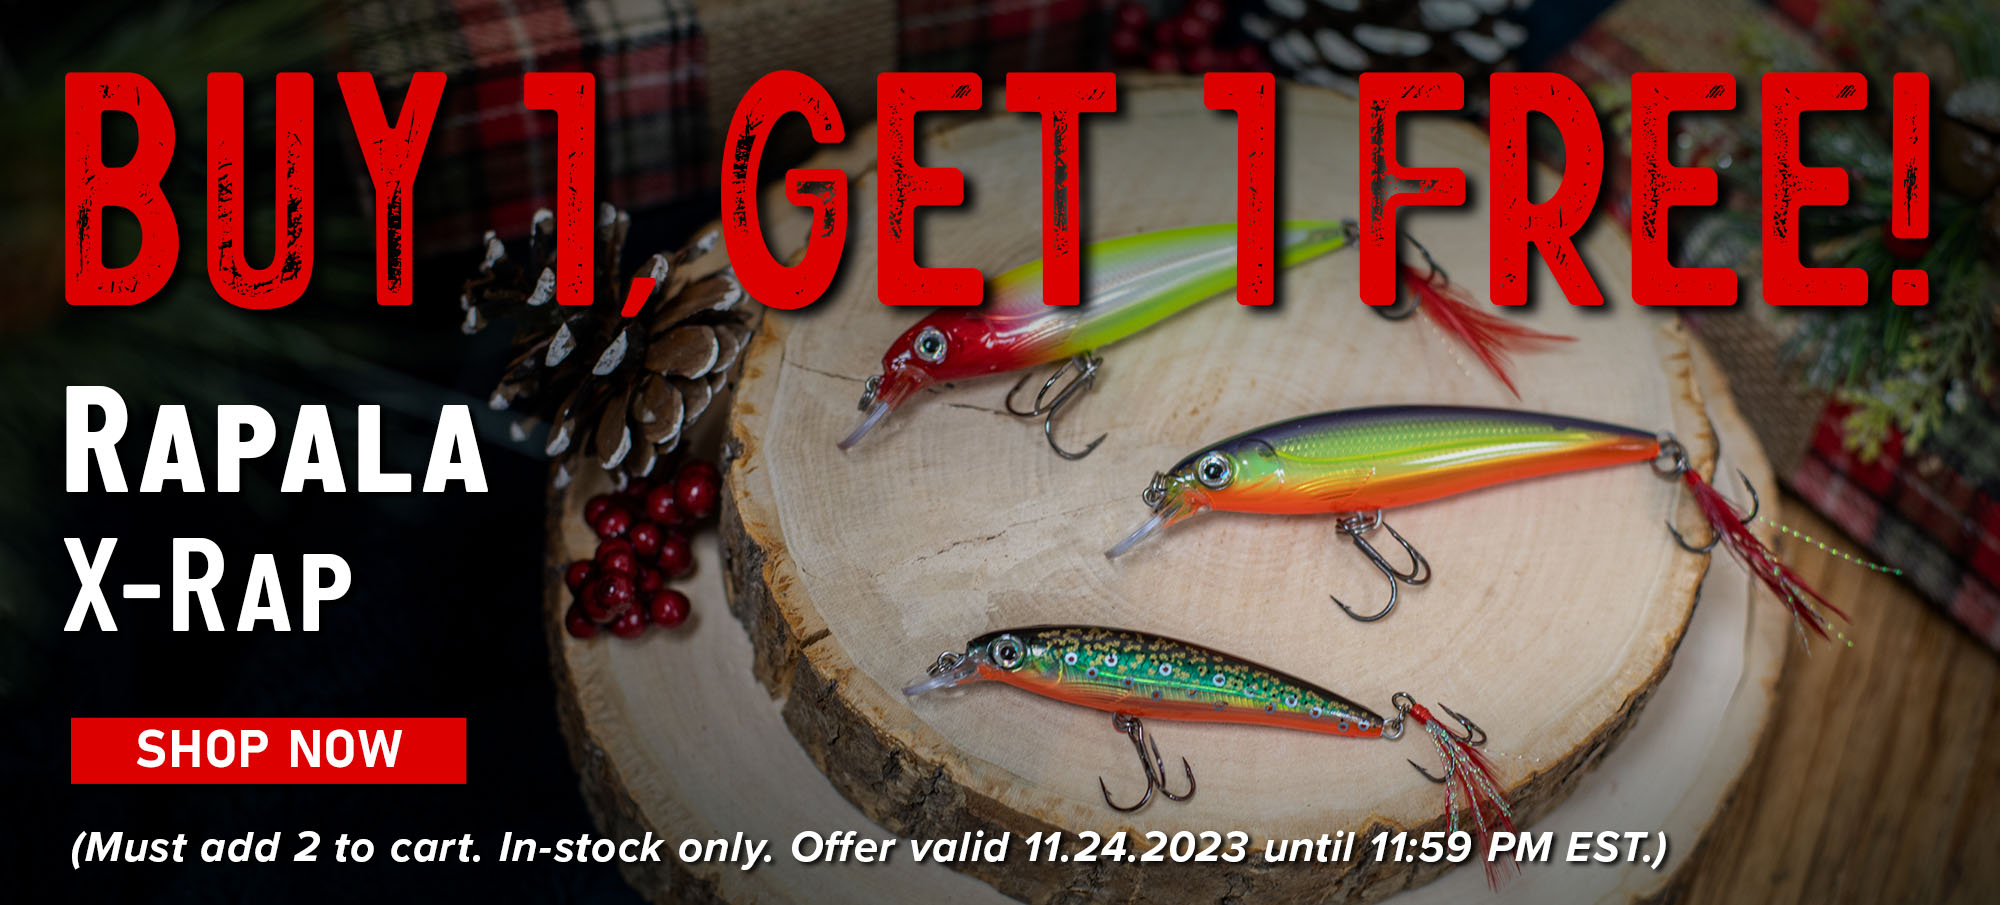 Buy 1, Get 1 Free! Rapala X-Rap Shop Now (Must add 2 to cart. In-stock only. Offer valid 11.24.2023 until 11:59 PM EST.)